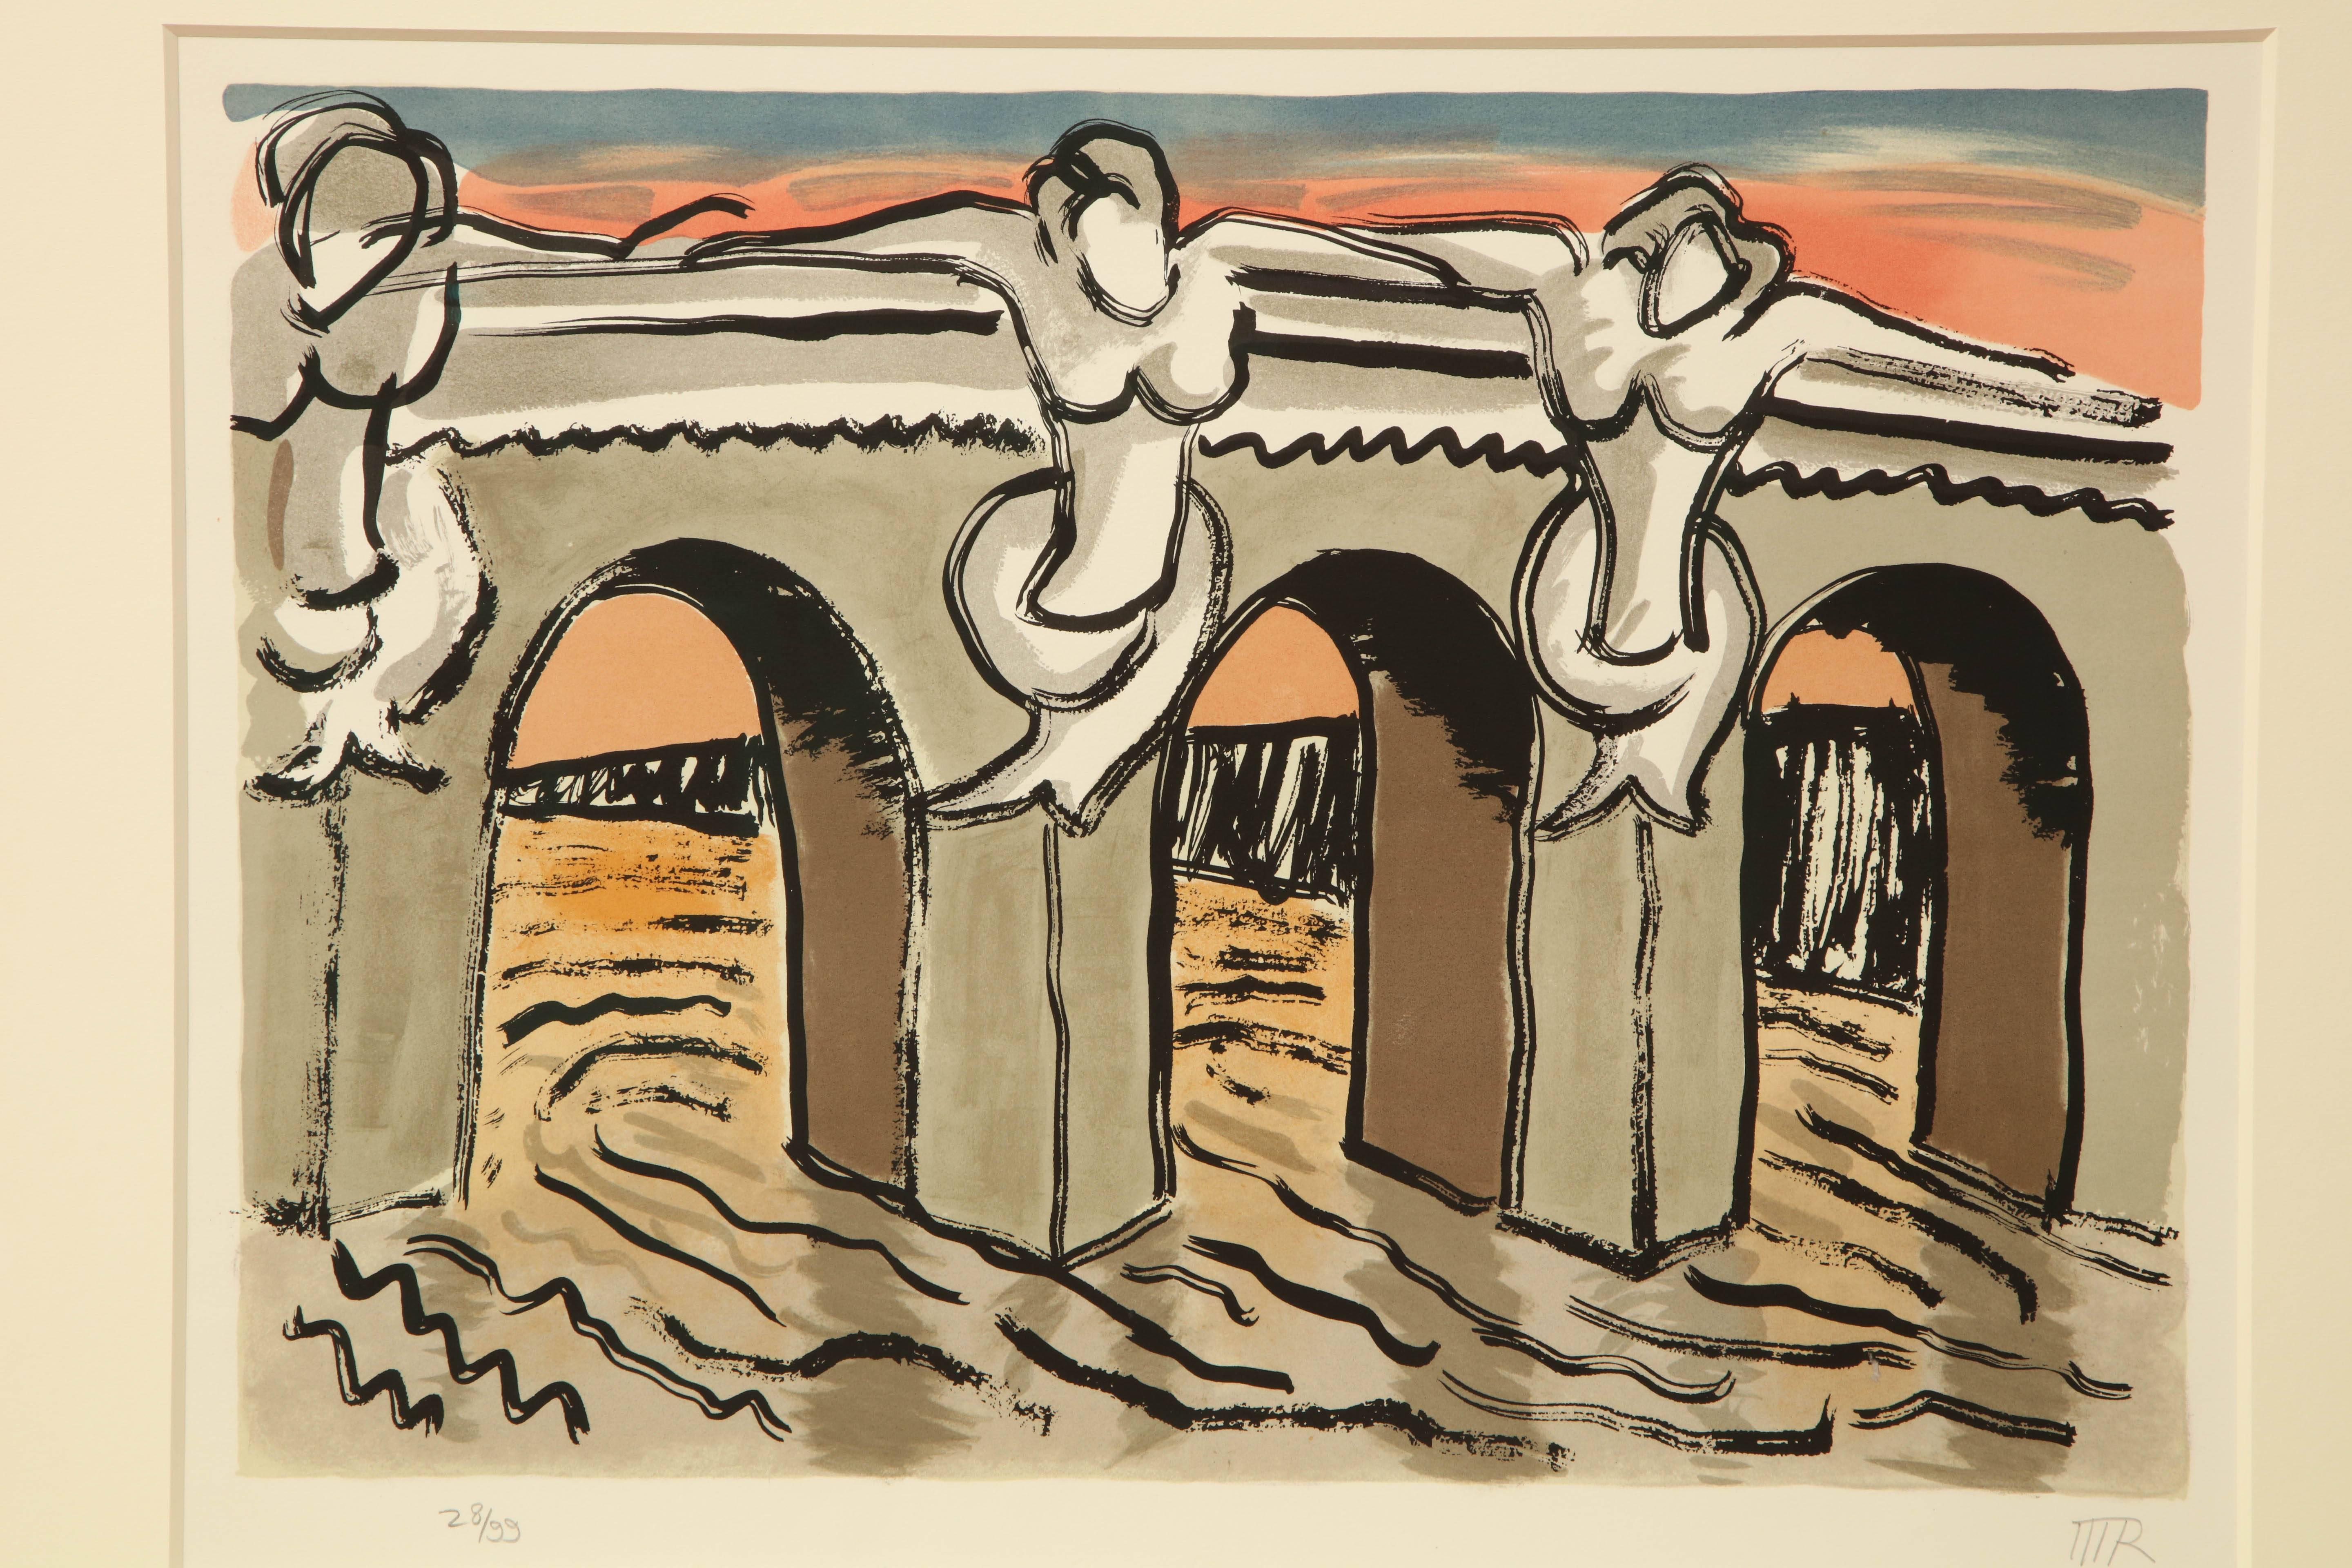 Lithograph in colors 'Pont Neuf' (Anselmino 6) by Man Ray

Measures: Framed: 24'' high; 29 5/8'' wide
Sheet: 14 7/8'' high; 20 3/4'' wide
Full Margins
Framed in custom gold leaf frame with mat and museum glass

Signed MR and numbered 28/99 in